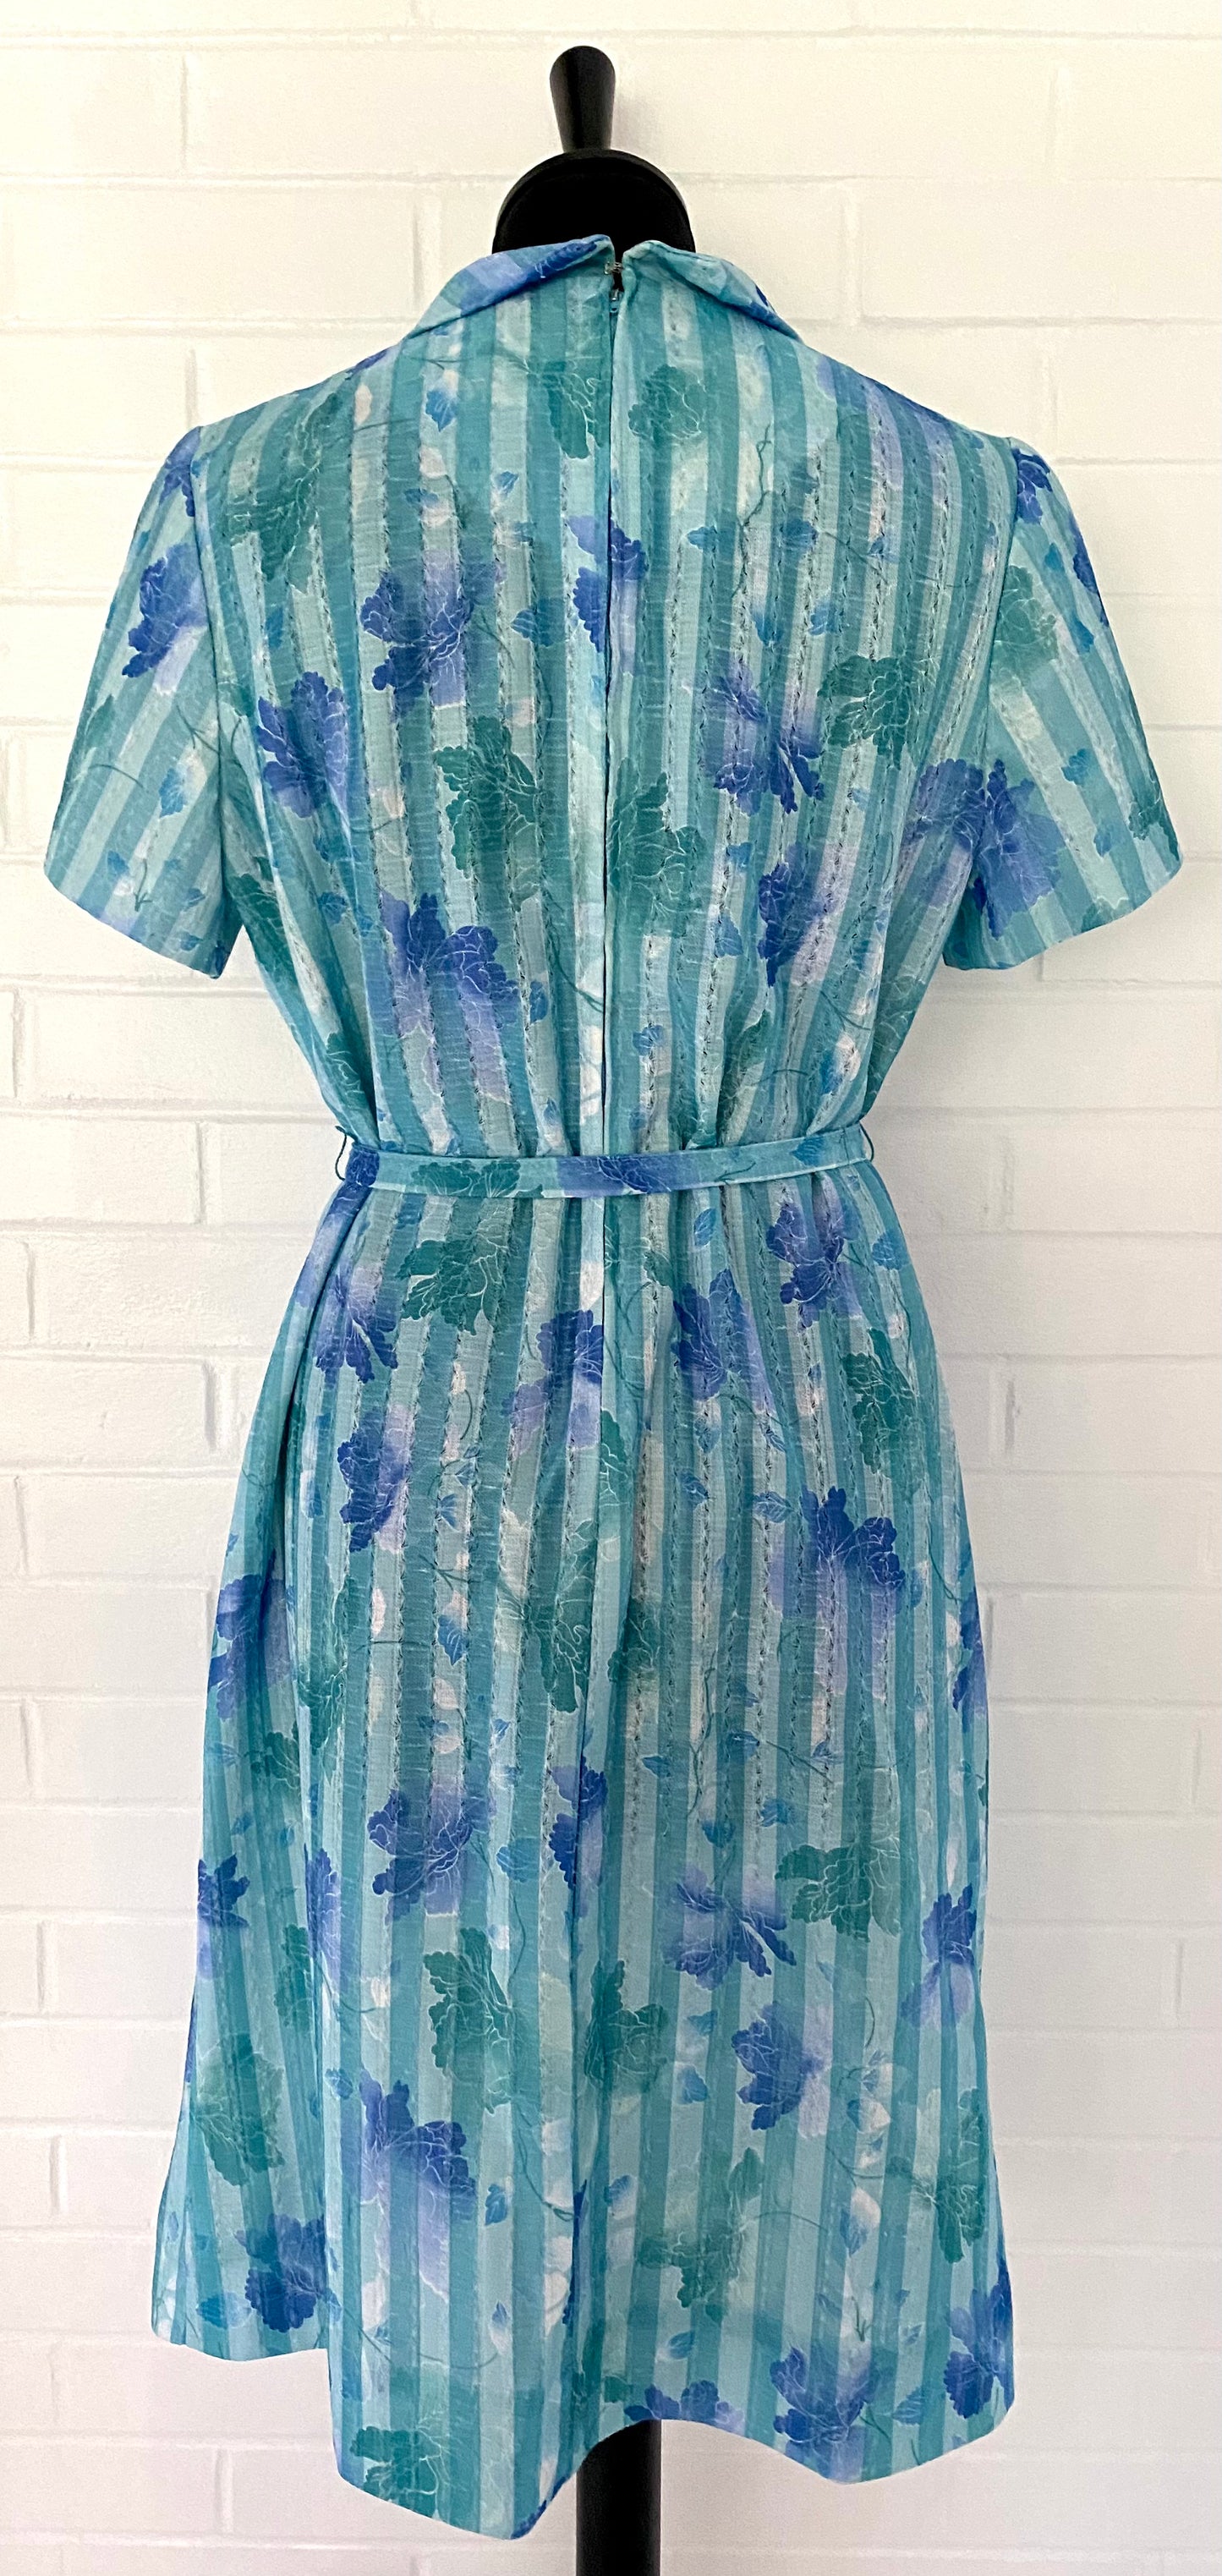 Late 60s/ Early 70s Shift Dress